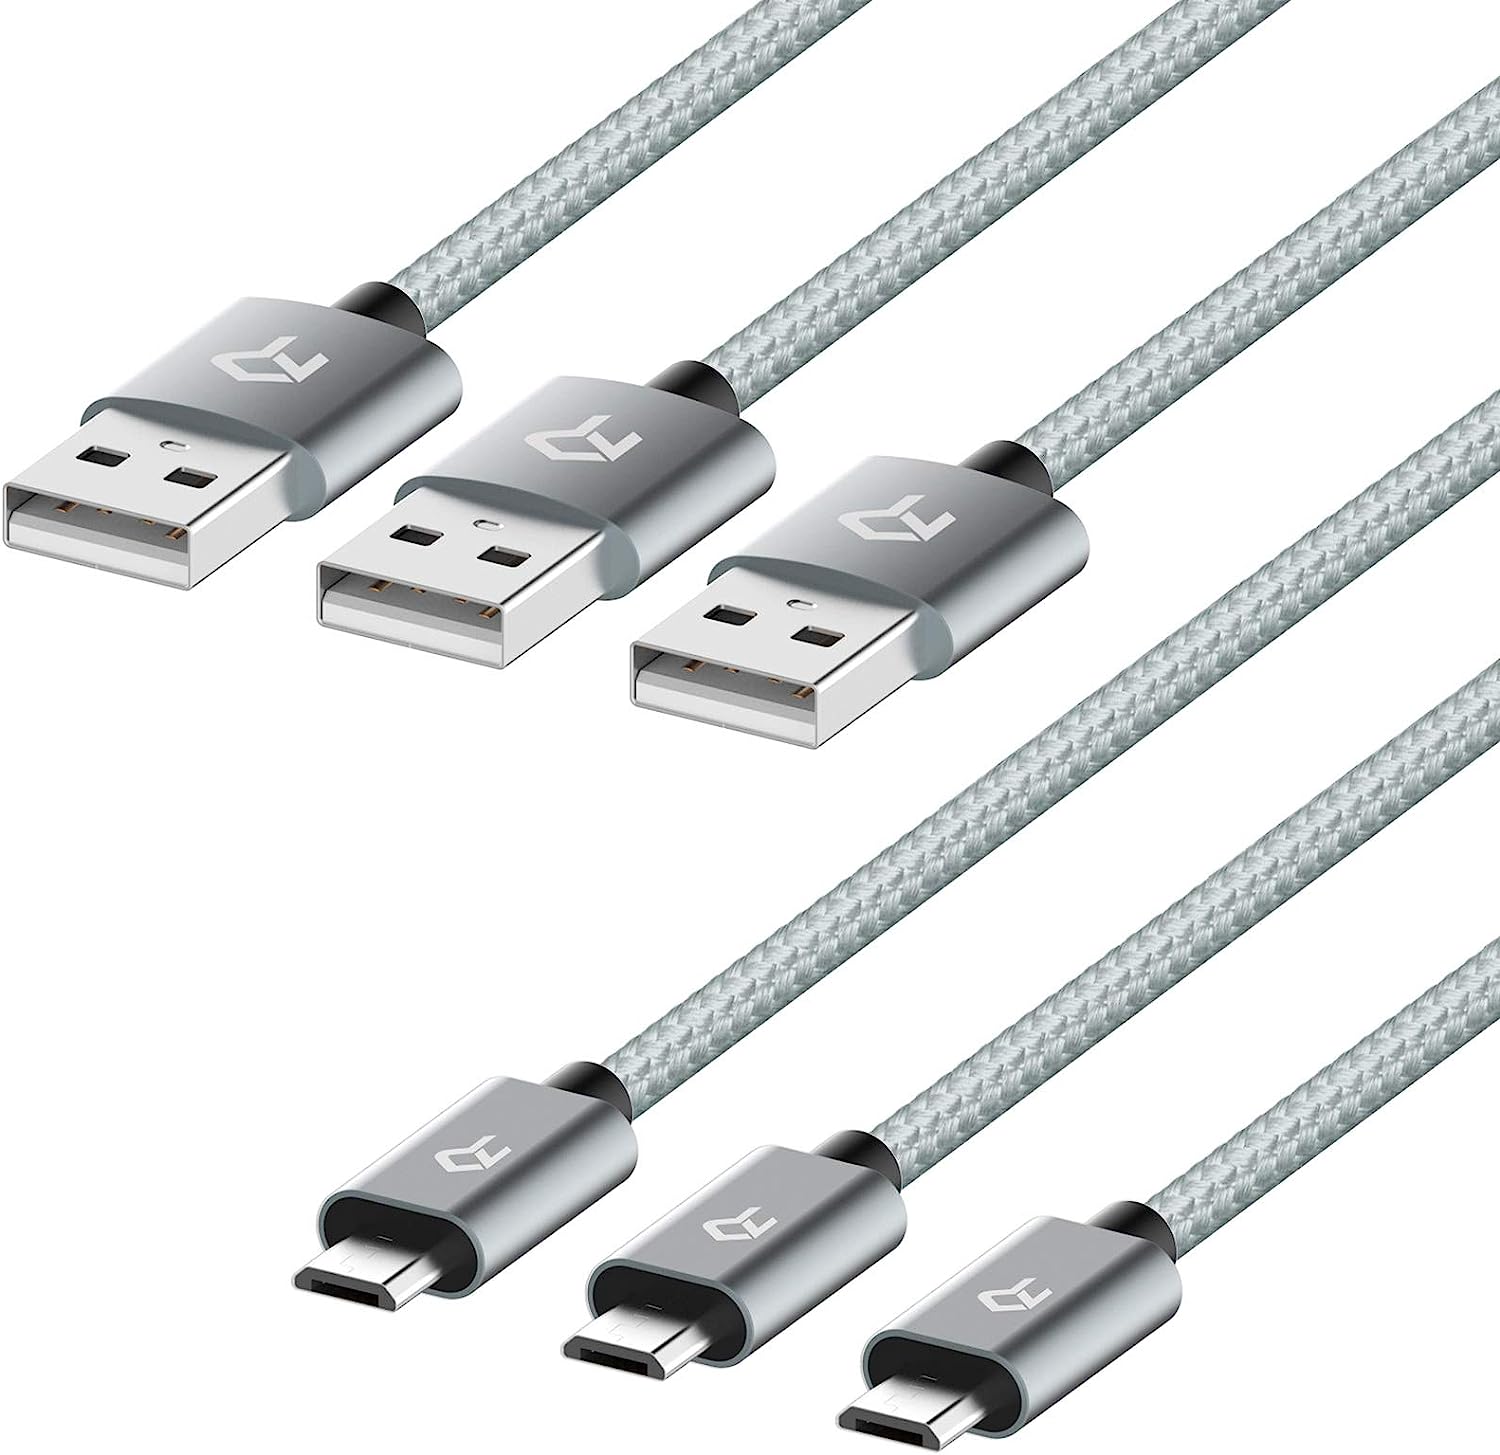 Rankie Micro USB Cable High Speed Data and Charging, [...]